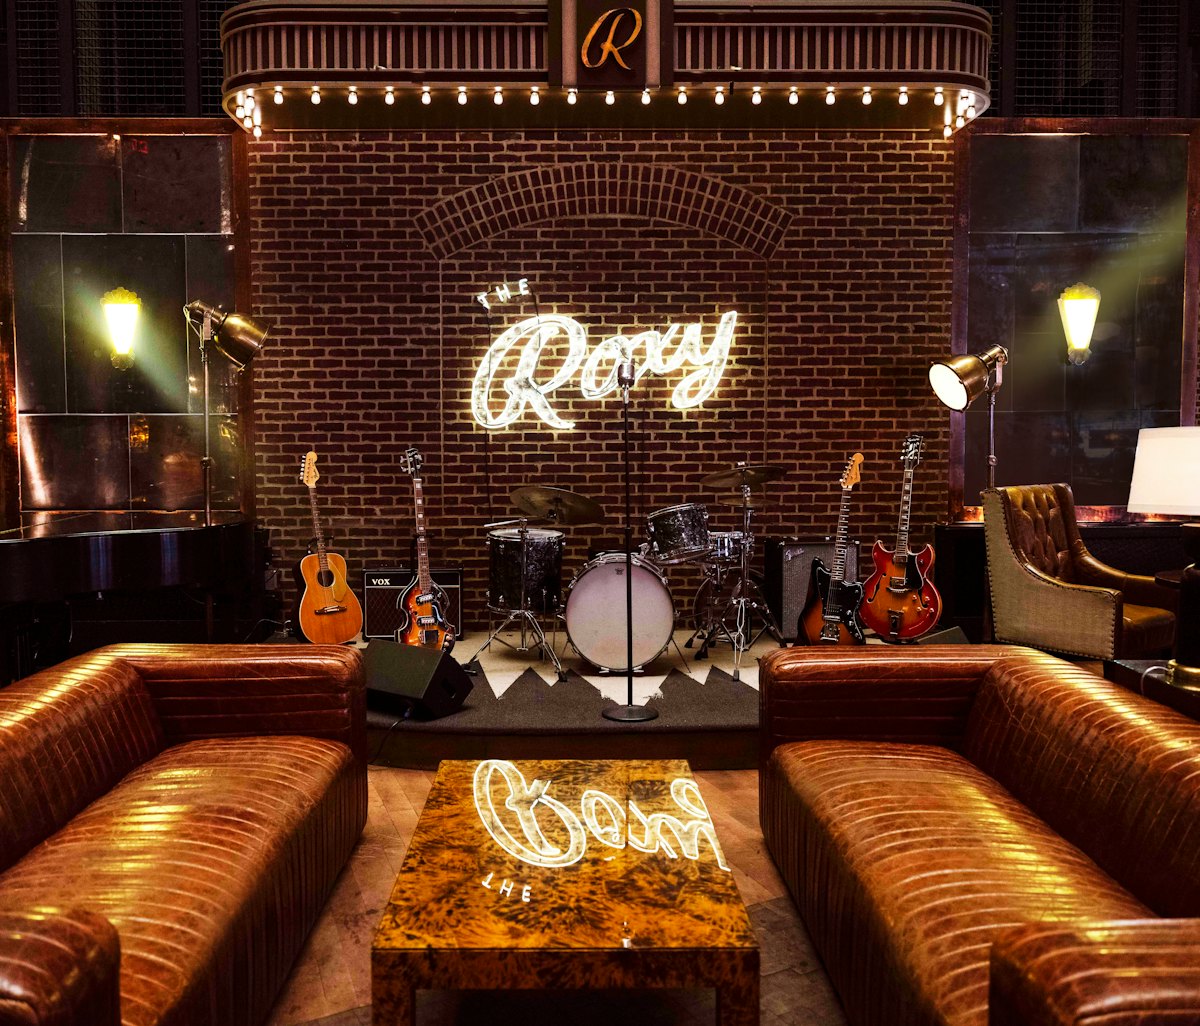 The Roxy Hotel is a great place to stay in Manhattan.